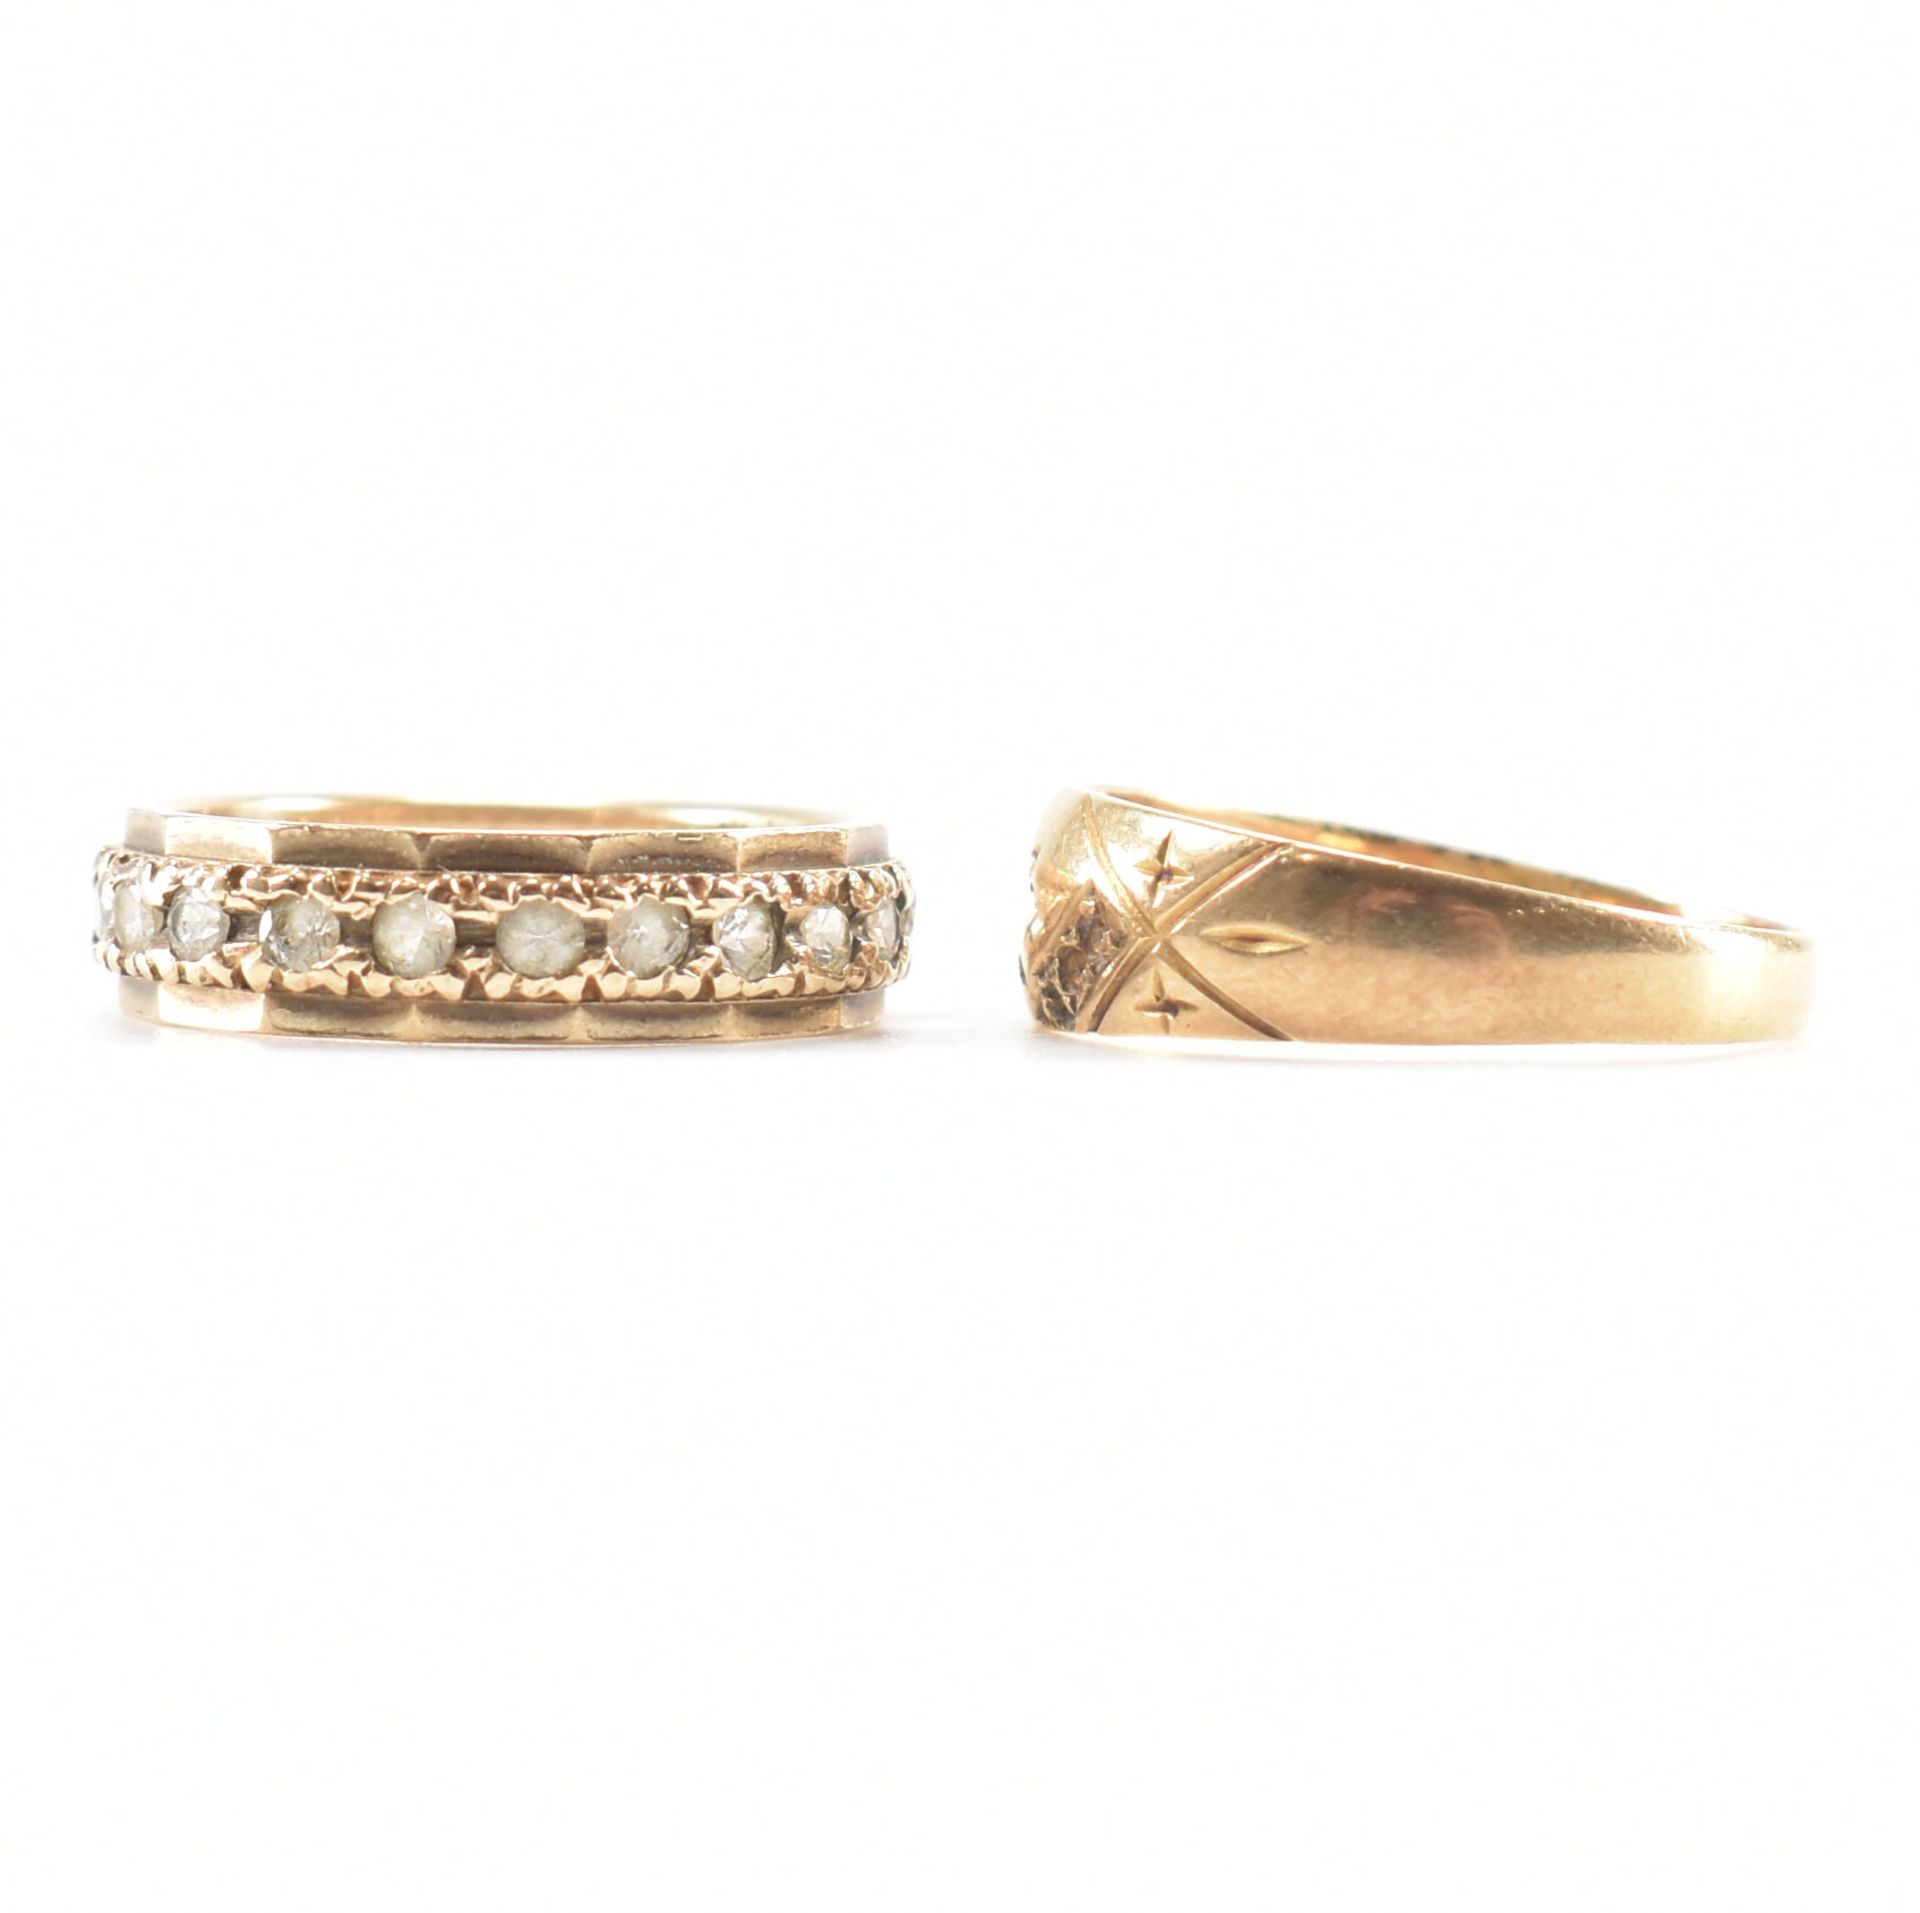 TWO 20TH CENTURY GOLD RING MOUNTS - Image 2 of 9